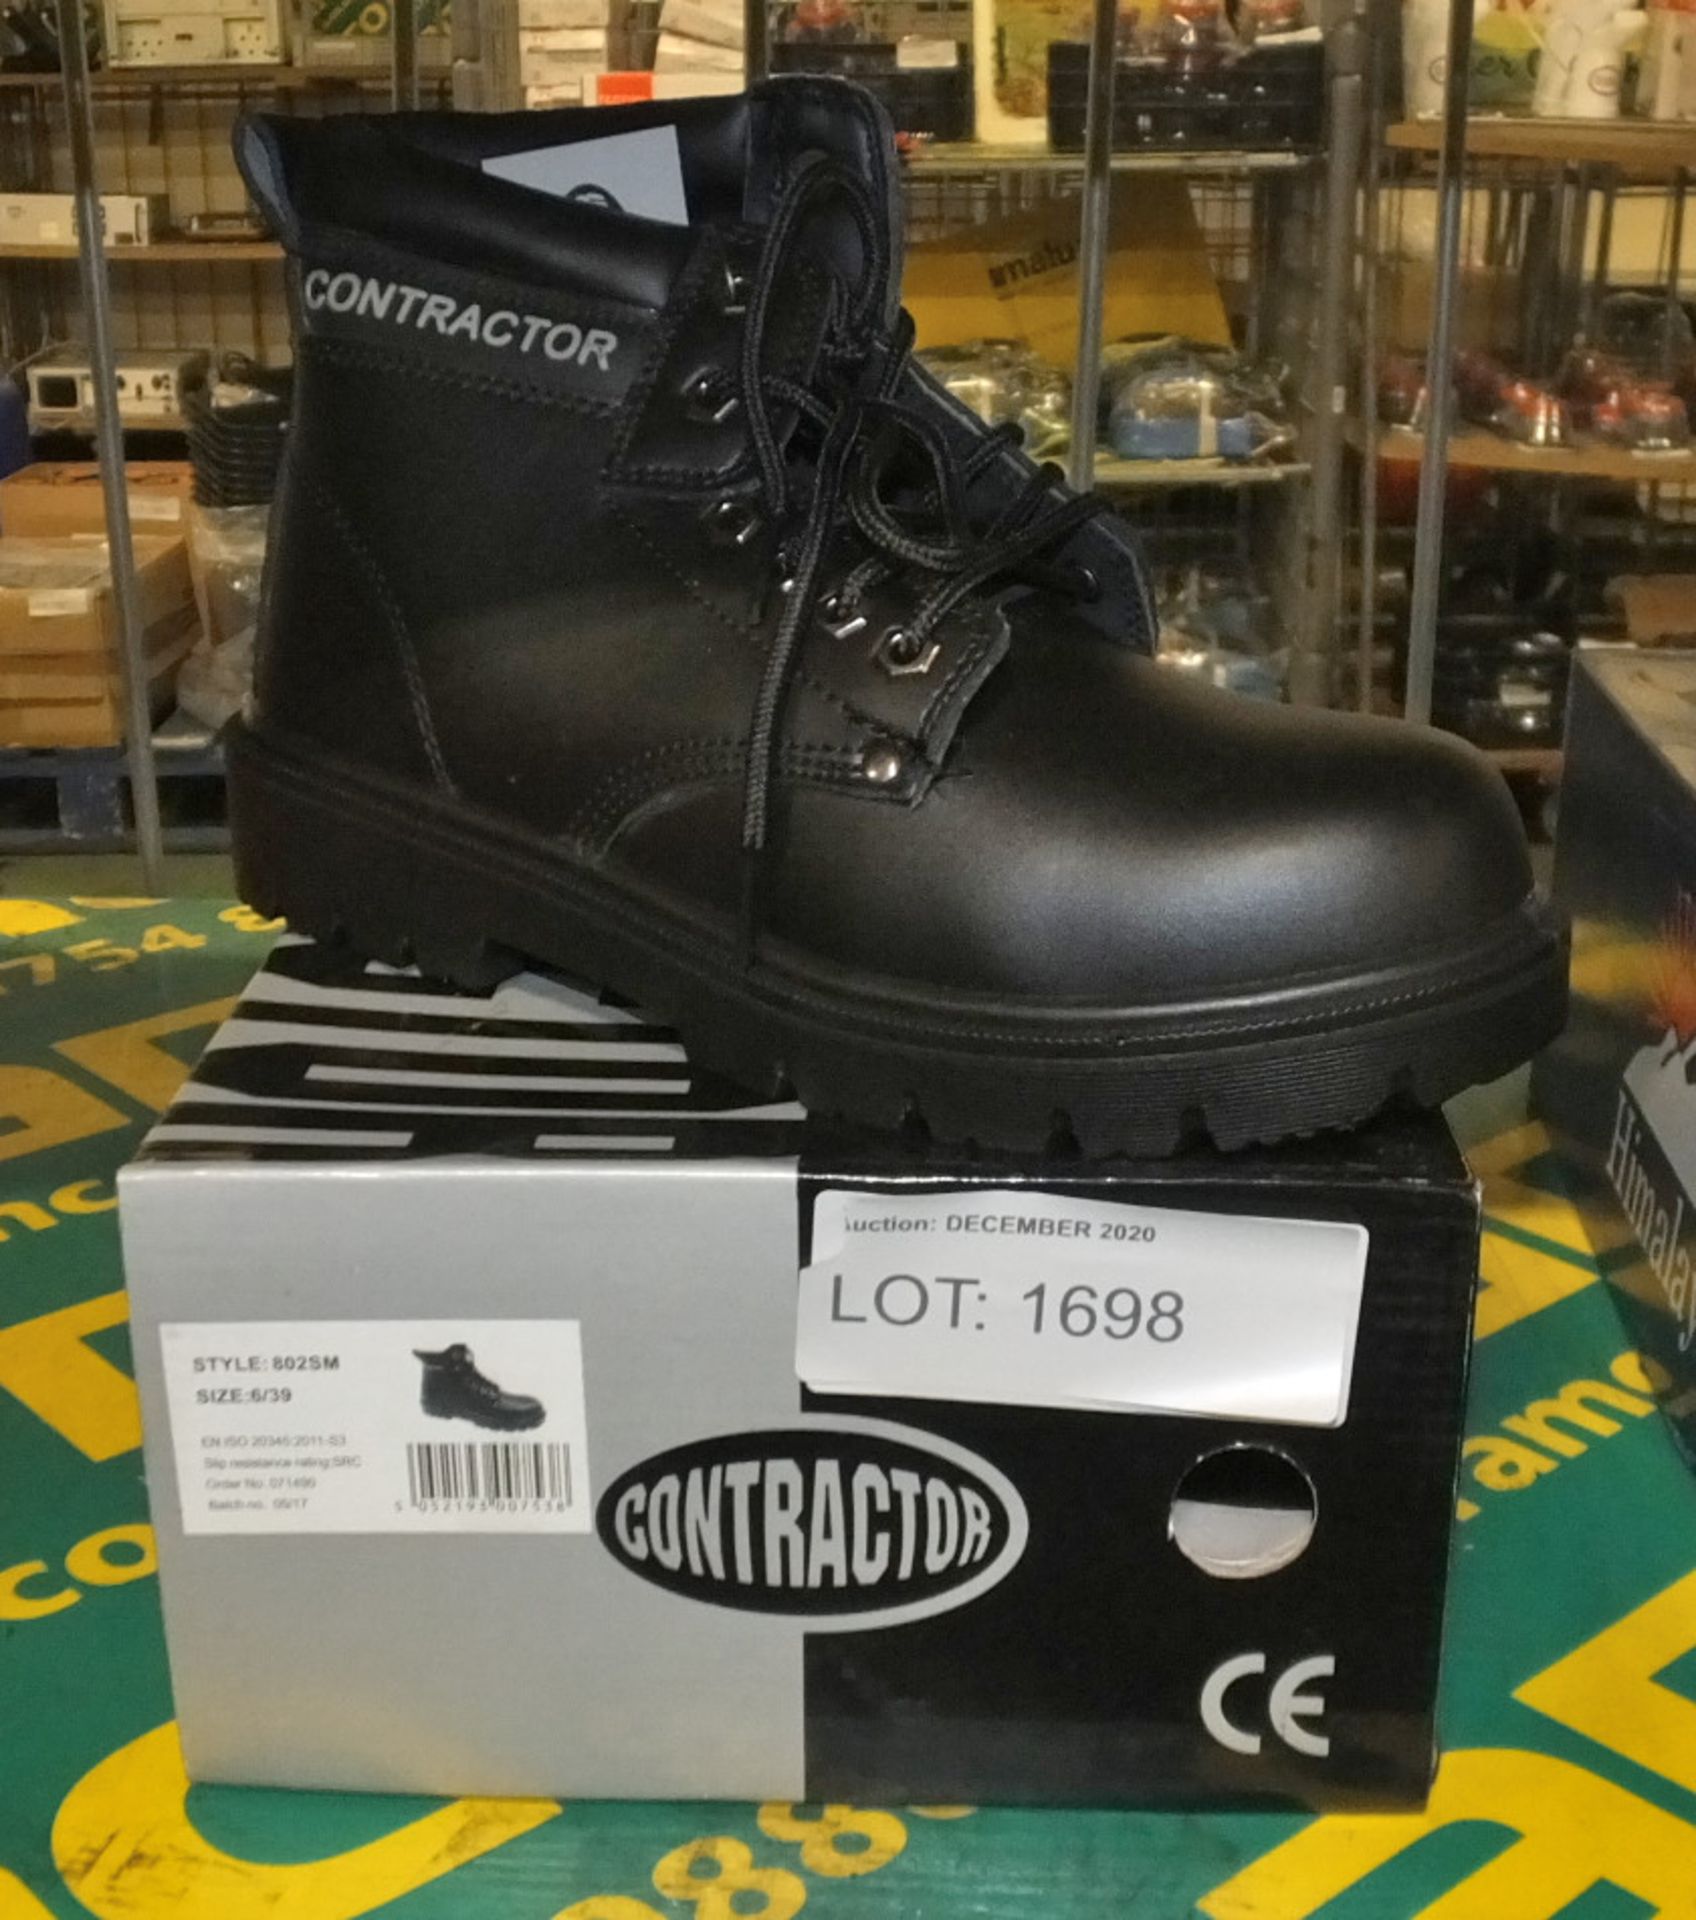 Safety boots - Contractor safety boot 802SM - UK6 / 39 Euro